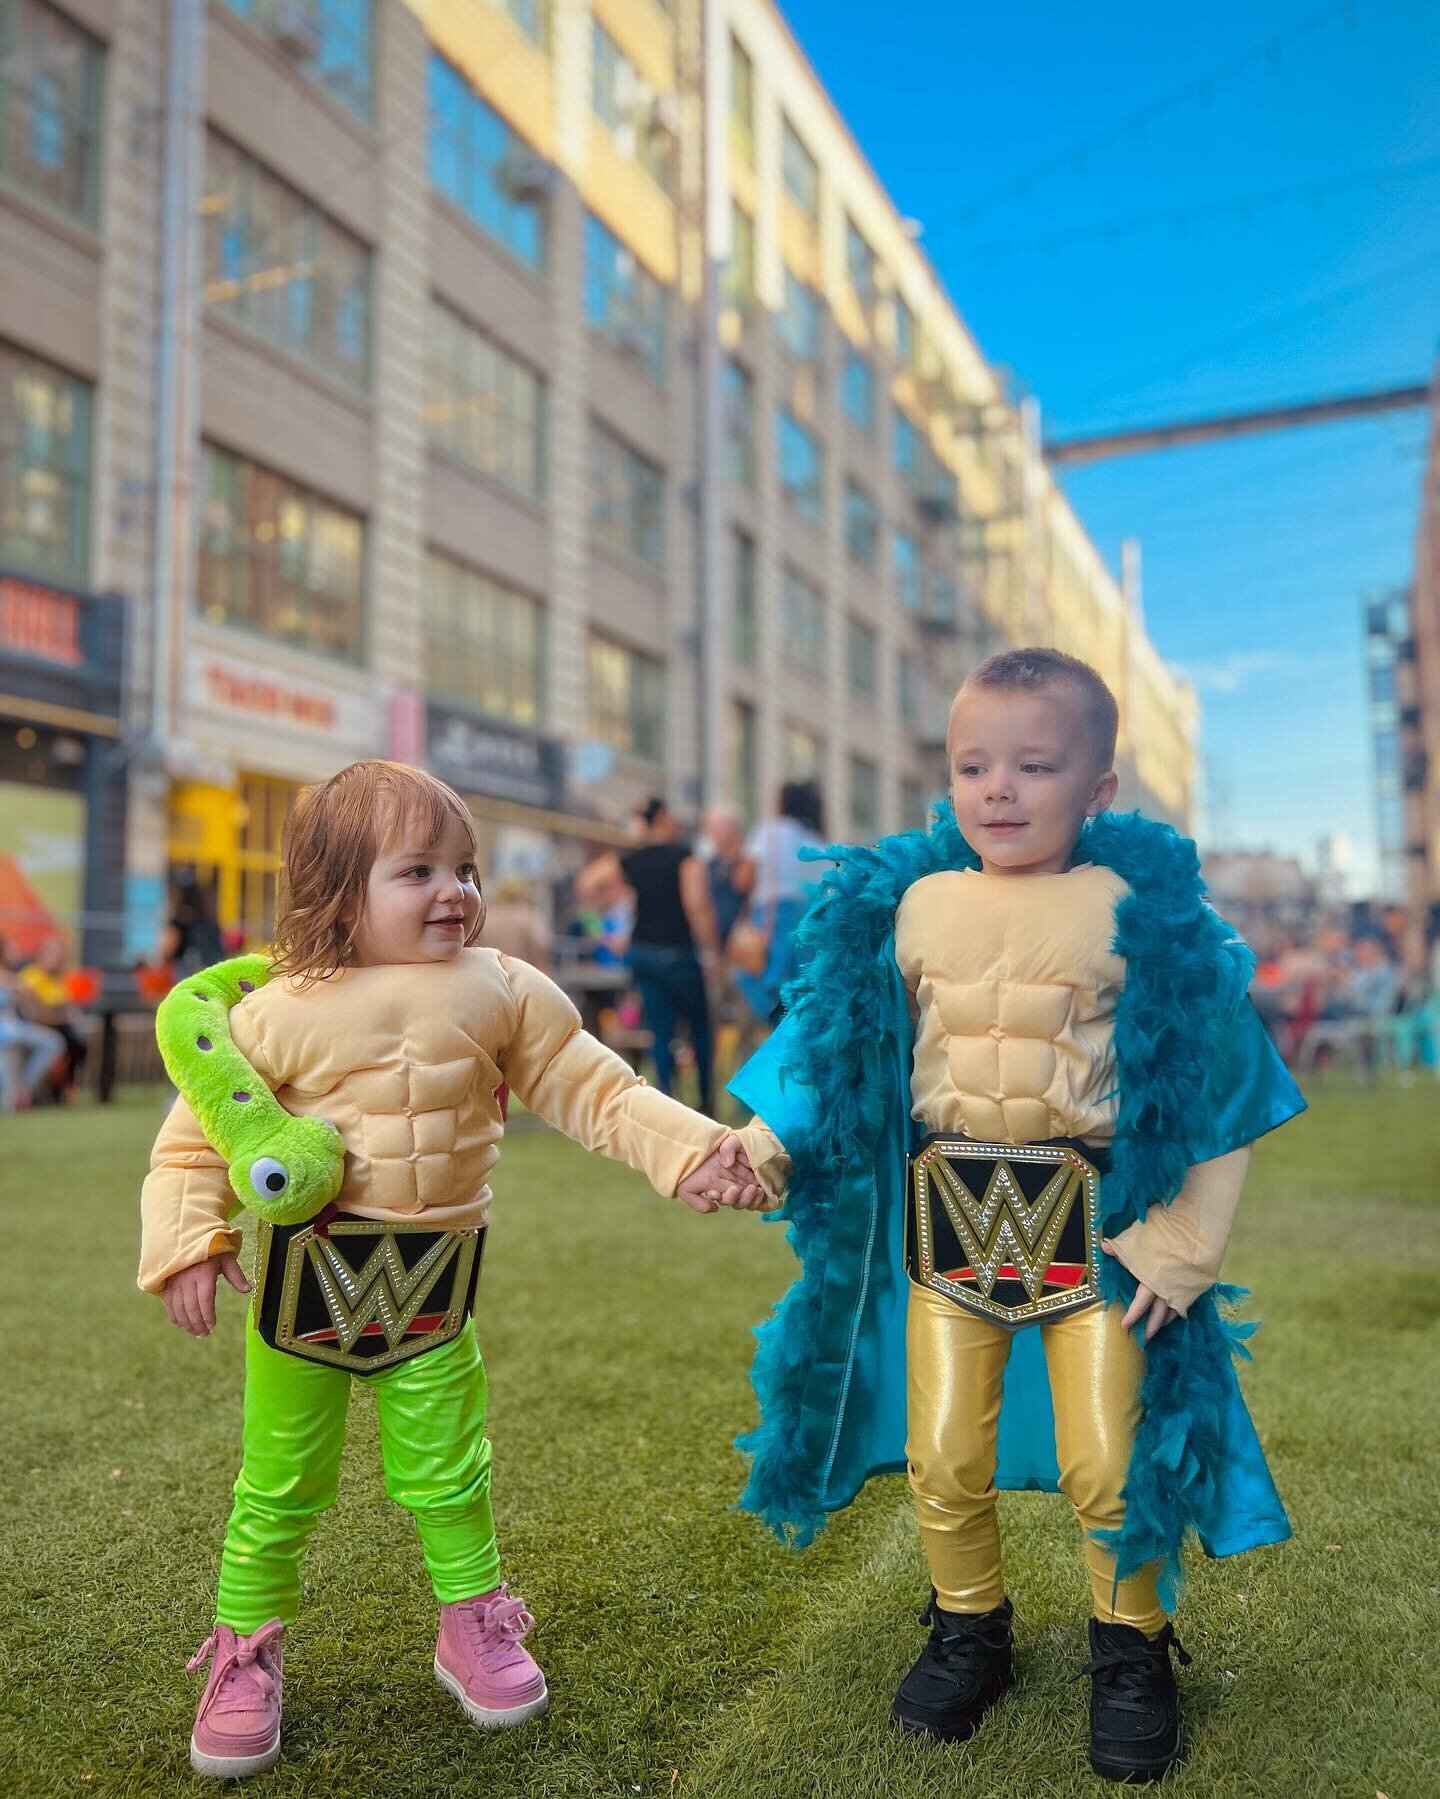 Some early trick or treat fun with these Hulkamaniacs. Thanks to @industrycity for always having something fun to do with our kids whether ice skating or book readings @powerhouseatic any of the other fun things we've done together #industrycity #ich